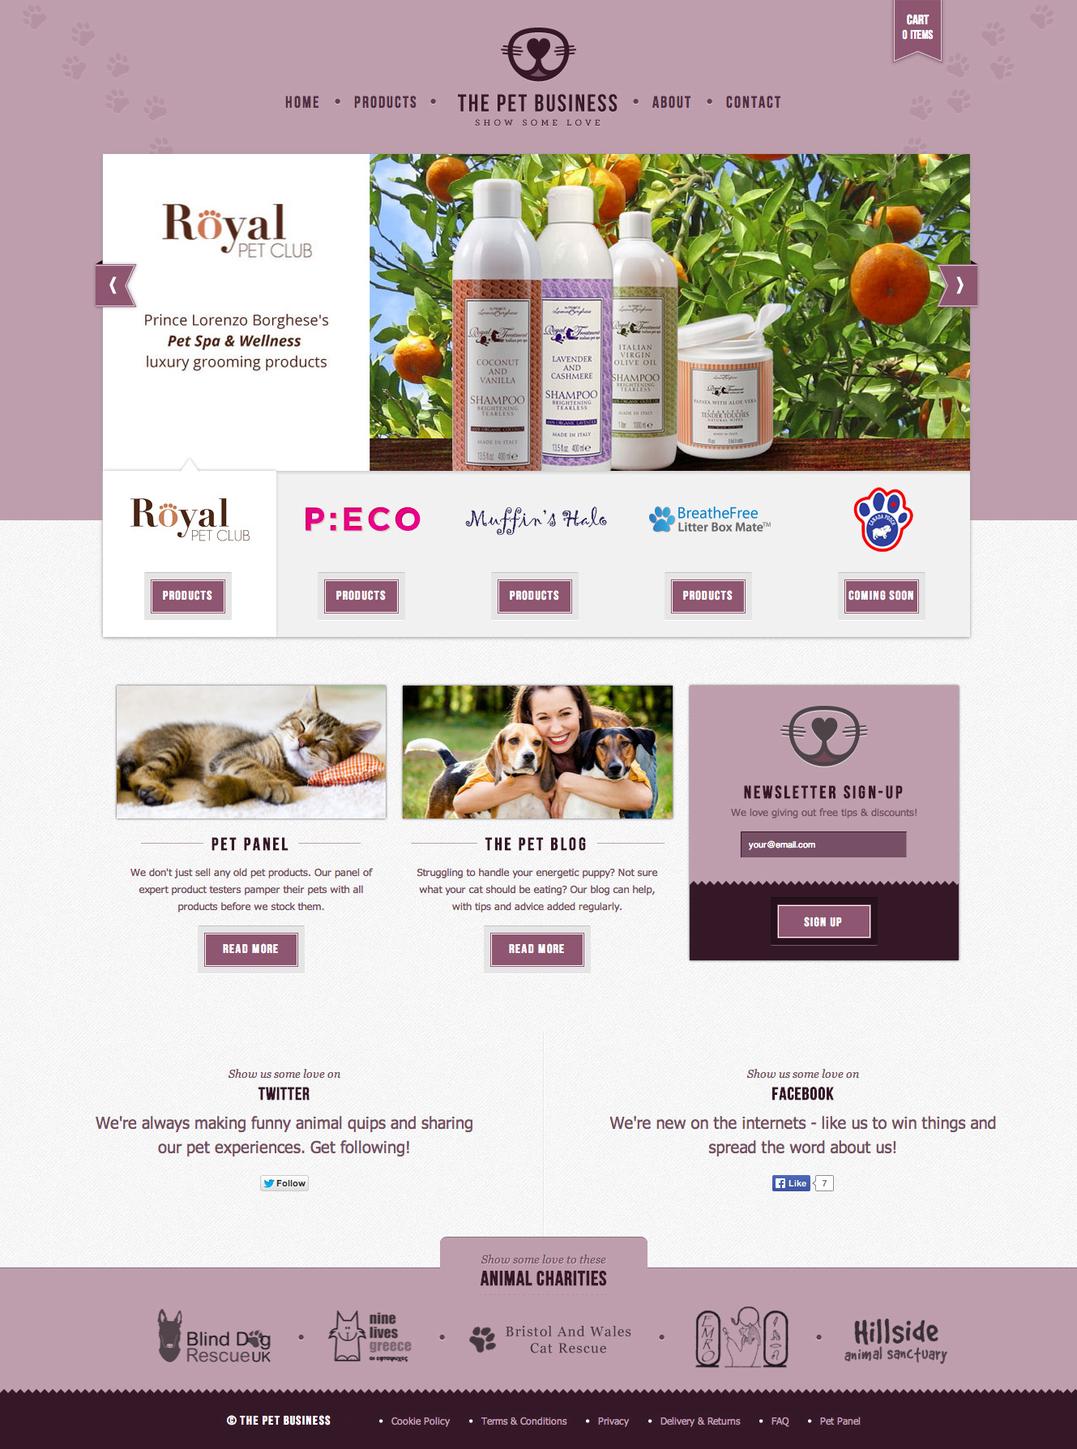 The Pet Business home page featuring a products carousel and various calls to action.